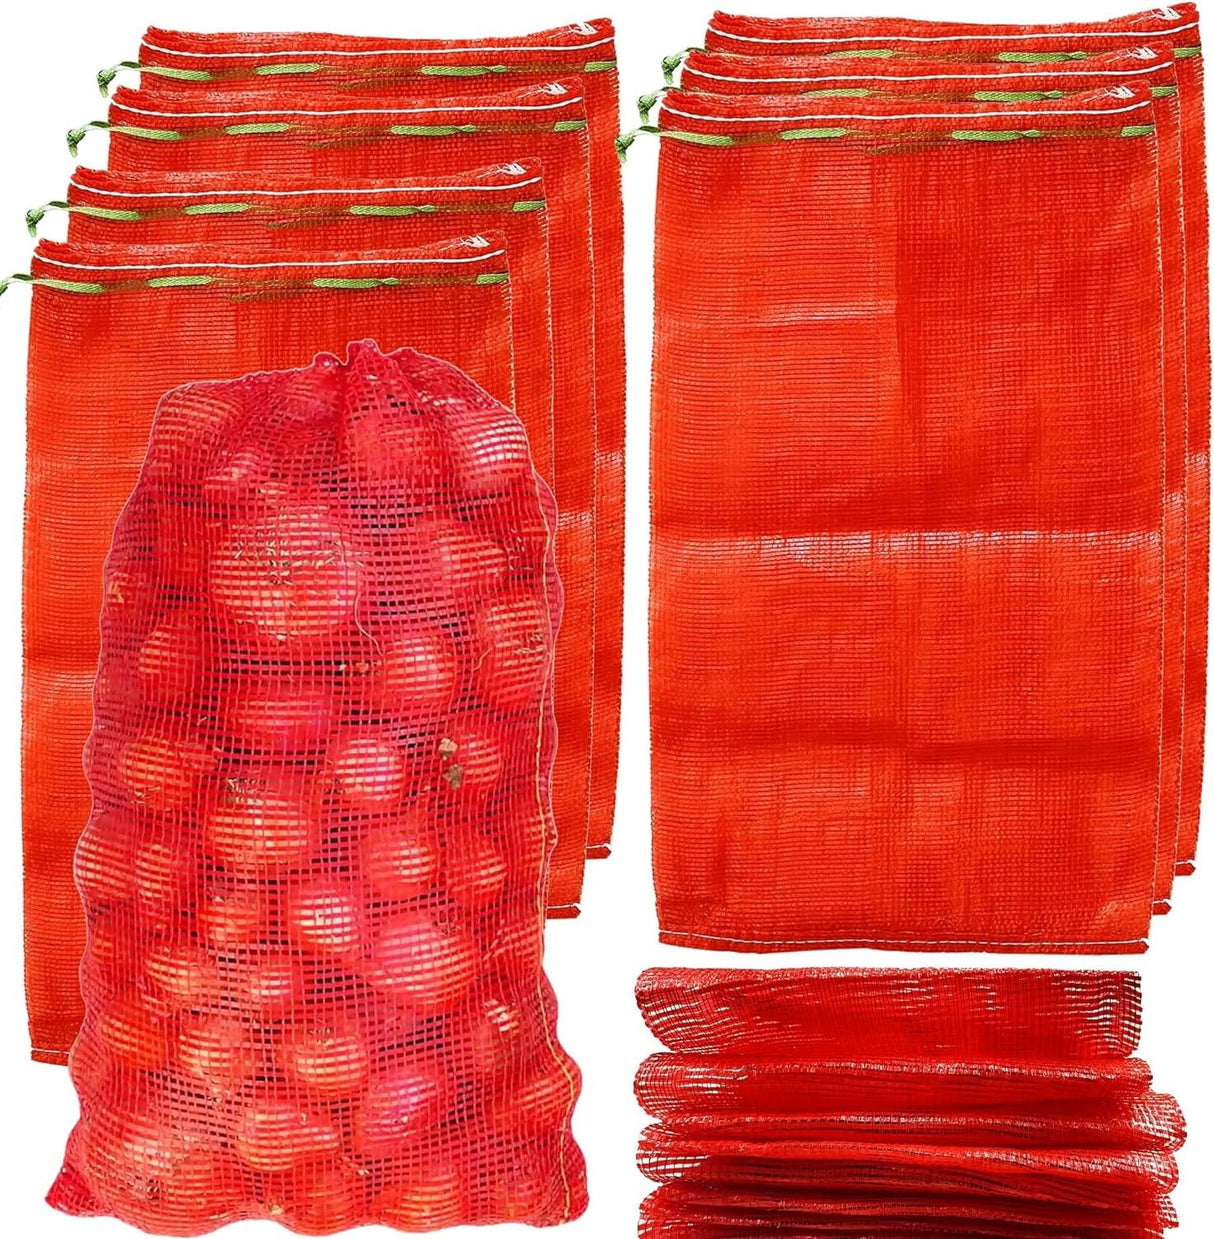 SINGHAL Leno Mesh Storage Produce Bags Reusable for Vegetable Storage Bags Onion Storage Washable Net Bags (20x28 Inch - Peach, 25)